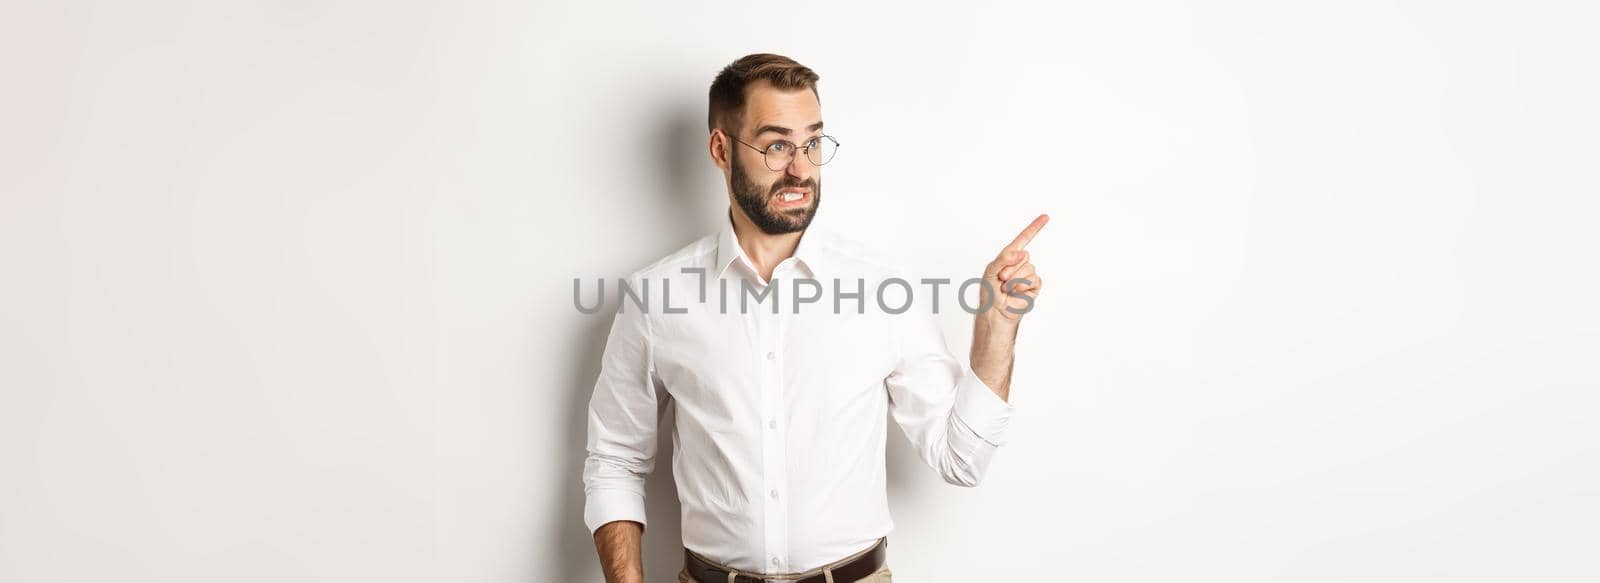 Young bearded guy seeing something disturbing, cringe while pointing finger left at promo offer, standing awkward against white background.